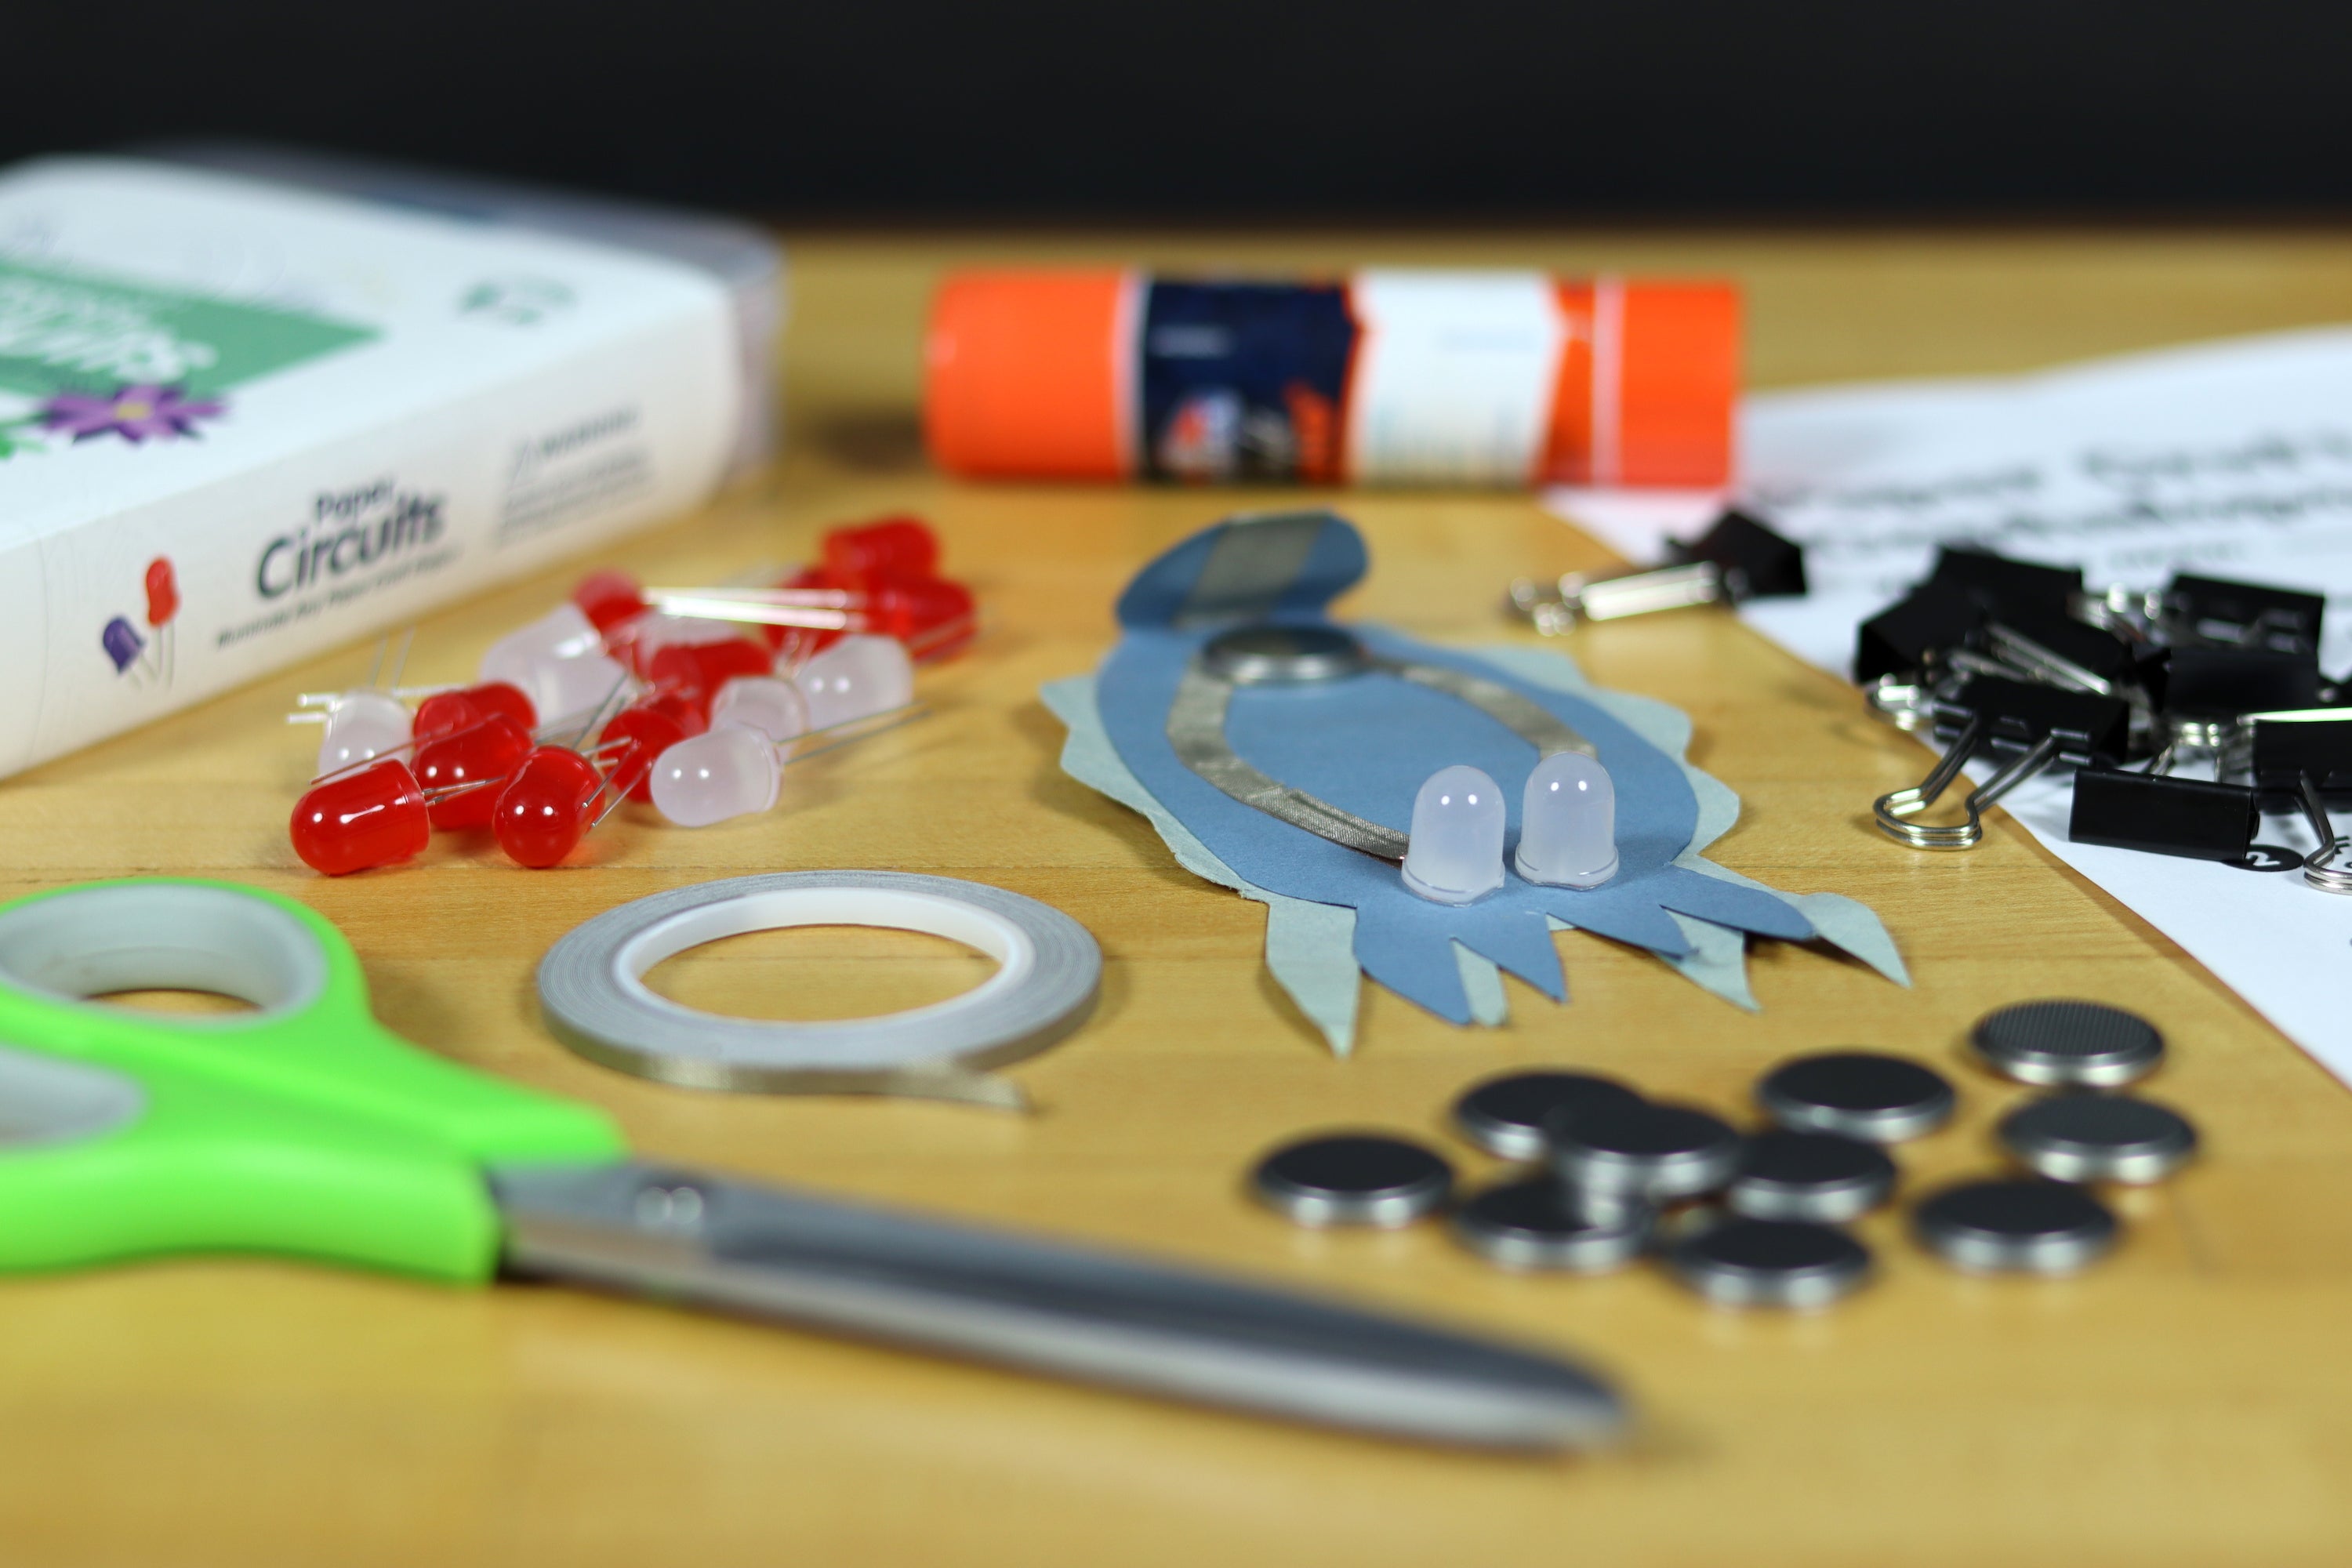 Paper Circuits Kits - Featuring Maker Tape! – Brown Dog Gadgets